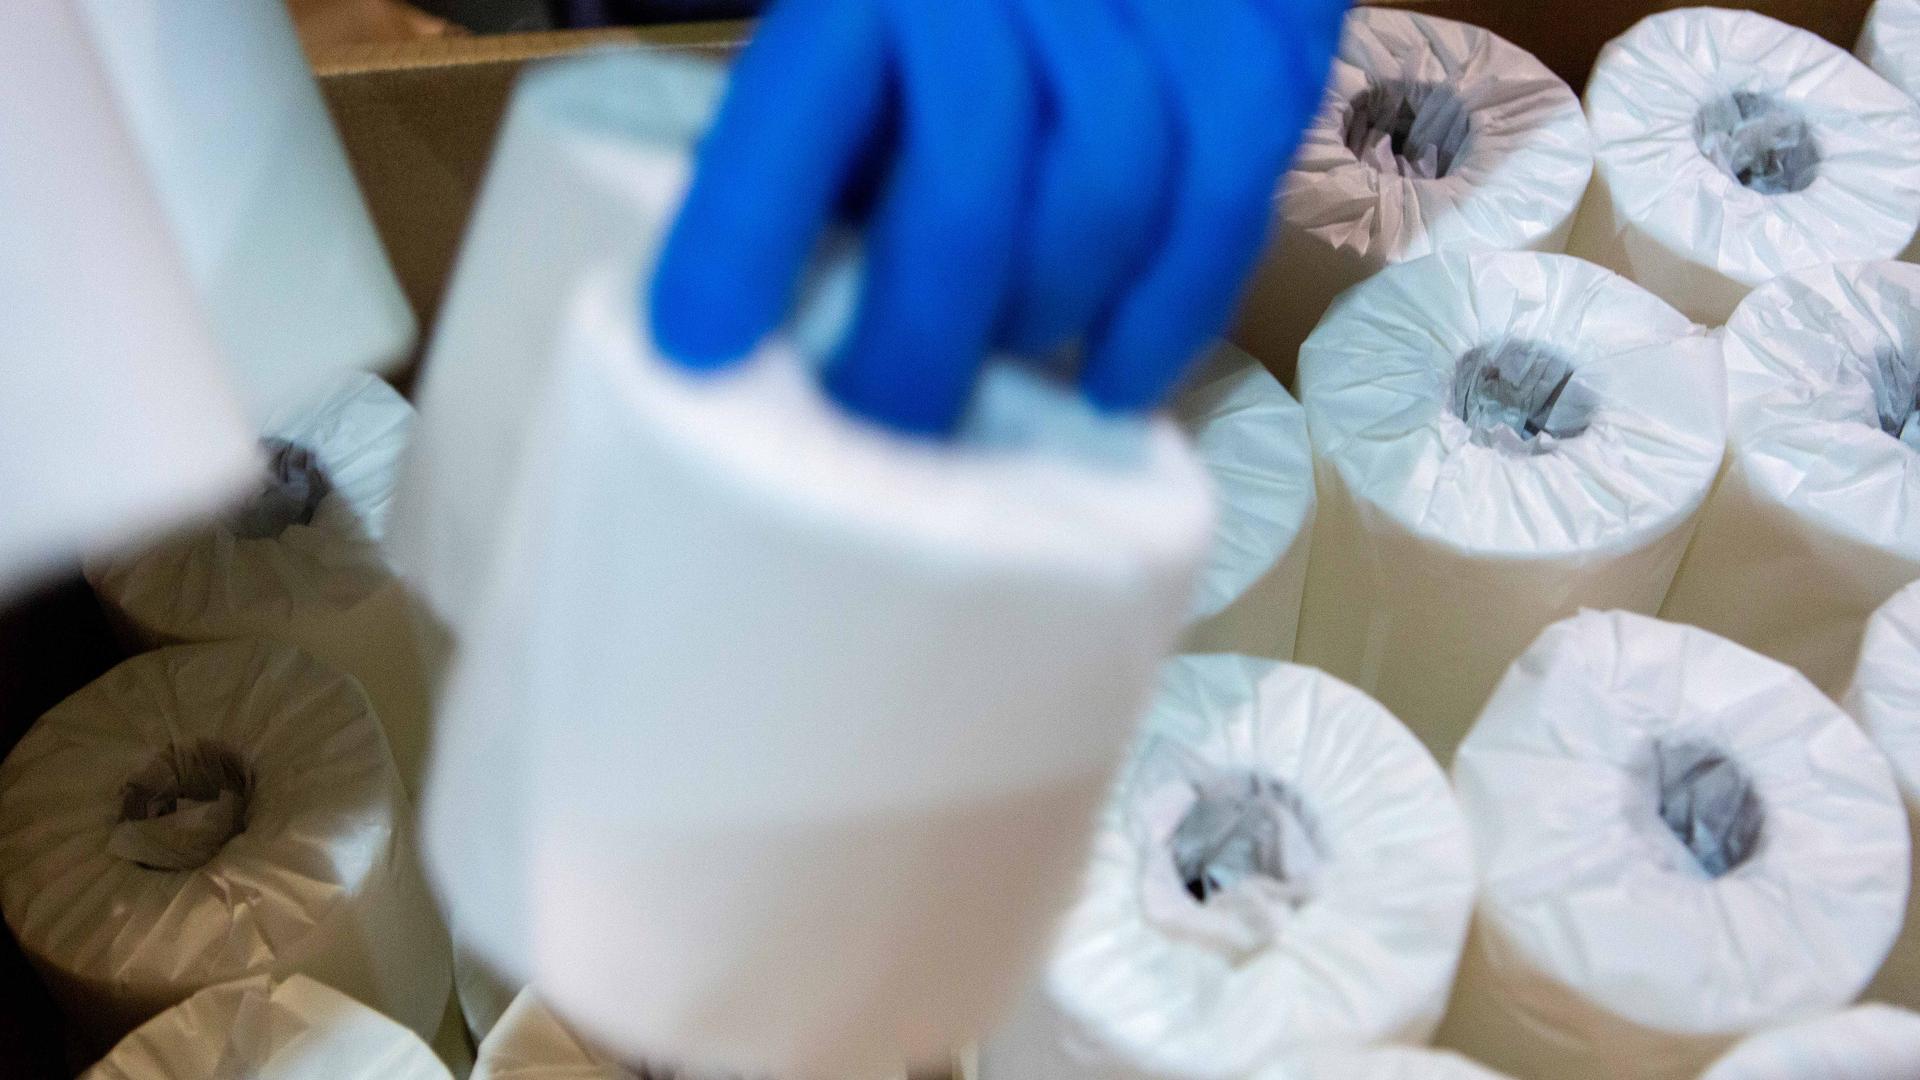 A close-up of the blue-gloved hand of a toilet paper packer who is boxing rolls of individually wrapped toilet paper to be shipped in Bangor, Maine, on April 7, 2020.